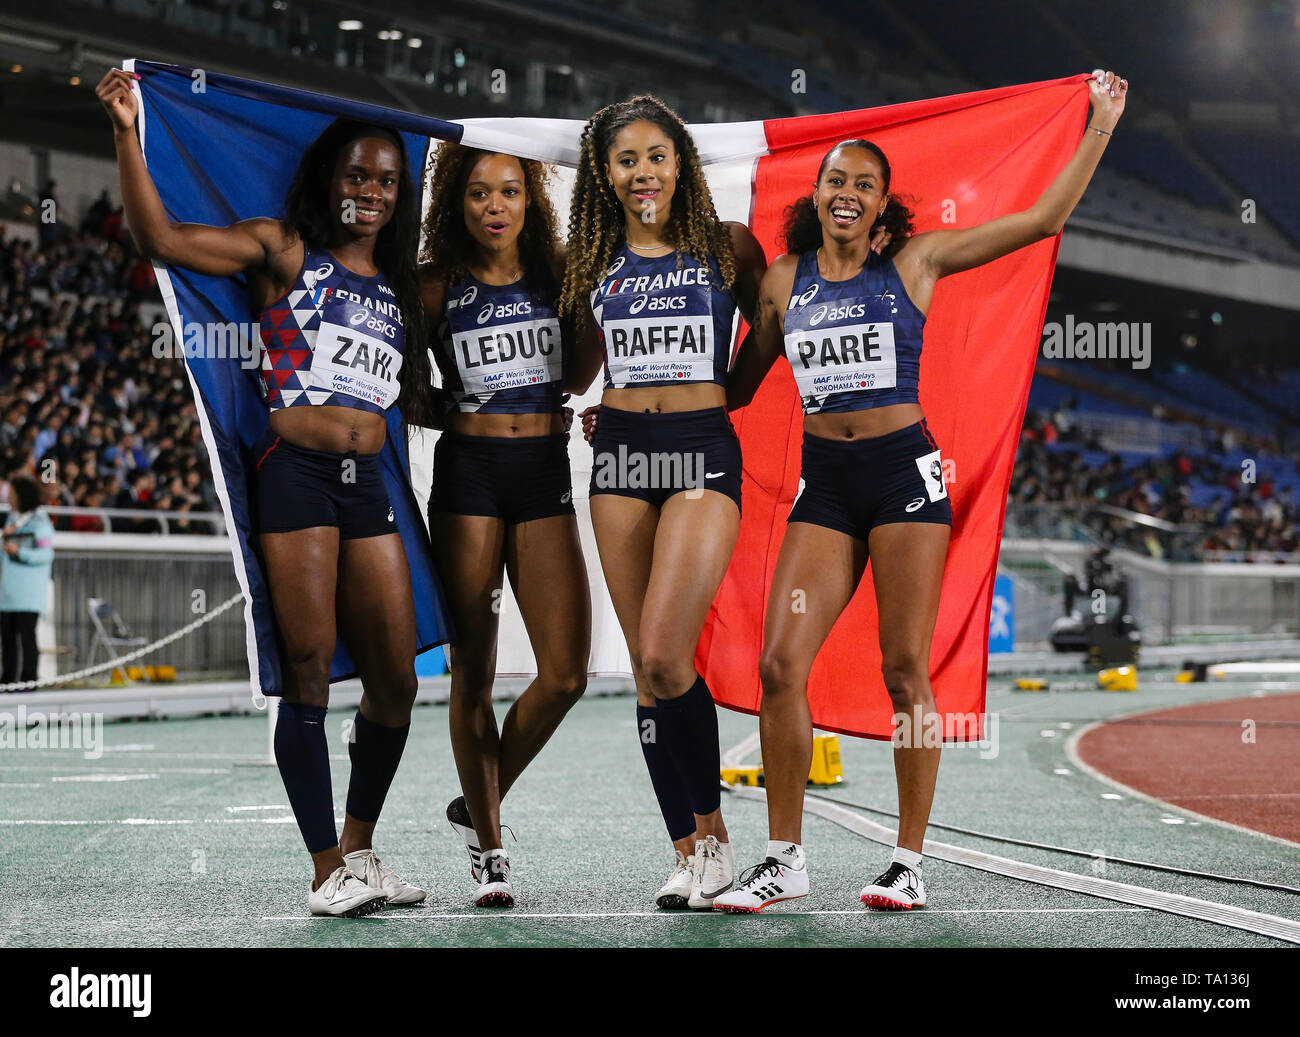 YOKOHAMA, JAPAN - MAY 12: Carolle Zahi, Cynthia Leduc, Estelle Raffai and Maroussia Paré of France after they the women's 4x200m final during Day 2 of the 2019 IAAF World Relay